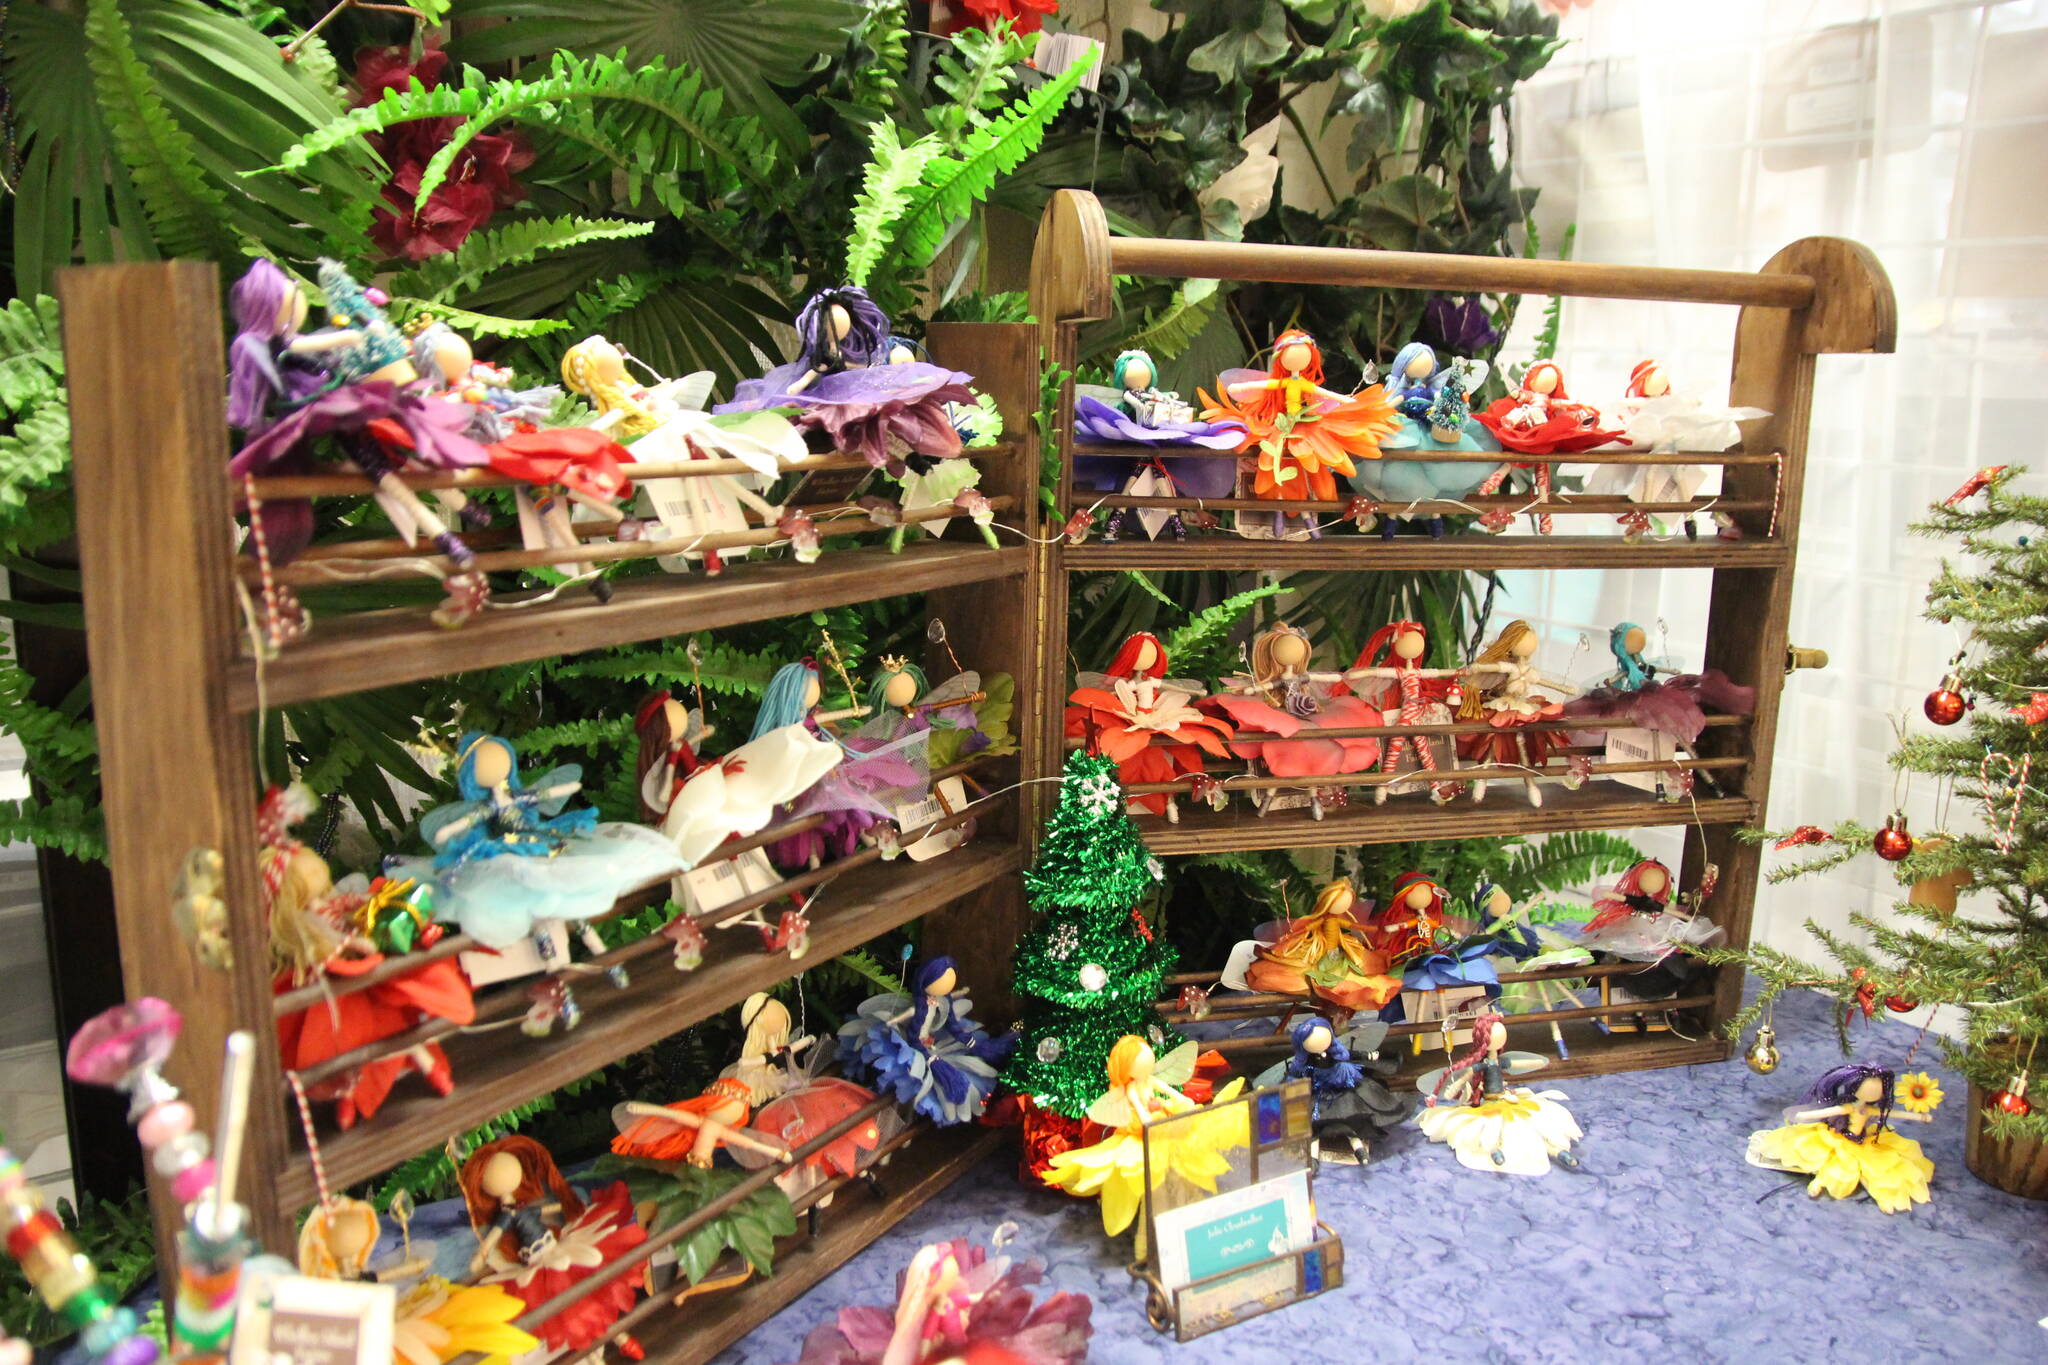 Some miniature fairies, created by Julie Cloudwalker and available at Whidbey Island Crafter’s Market Studios, can add a touch of wonderland to any dreamer’s bedroom. (Photo by Luisa Loi)